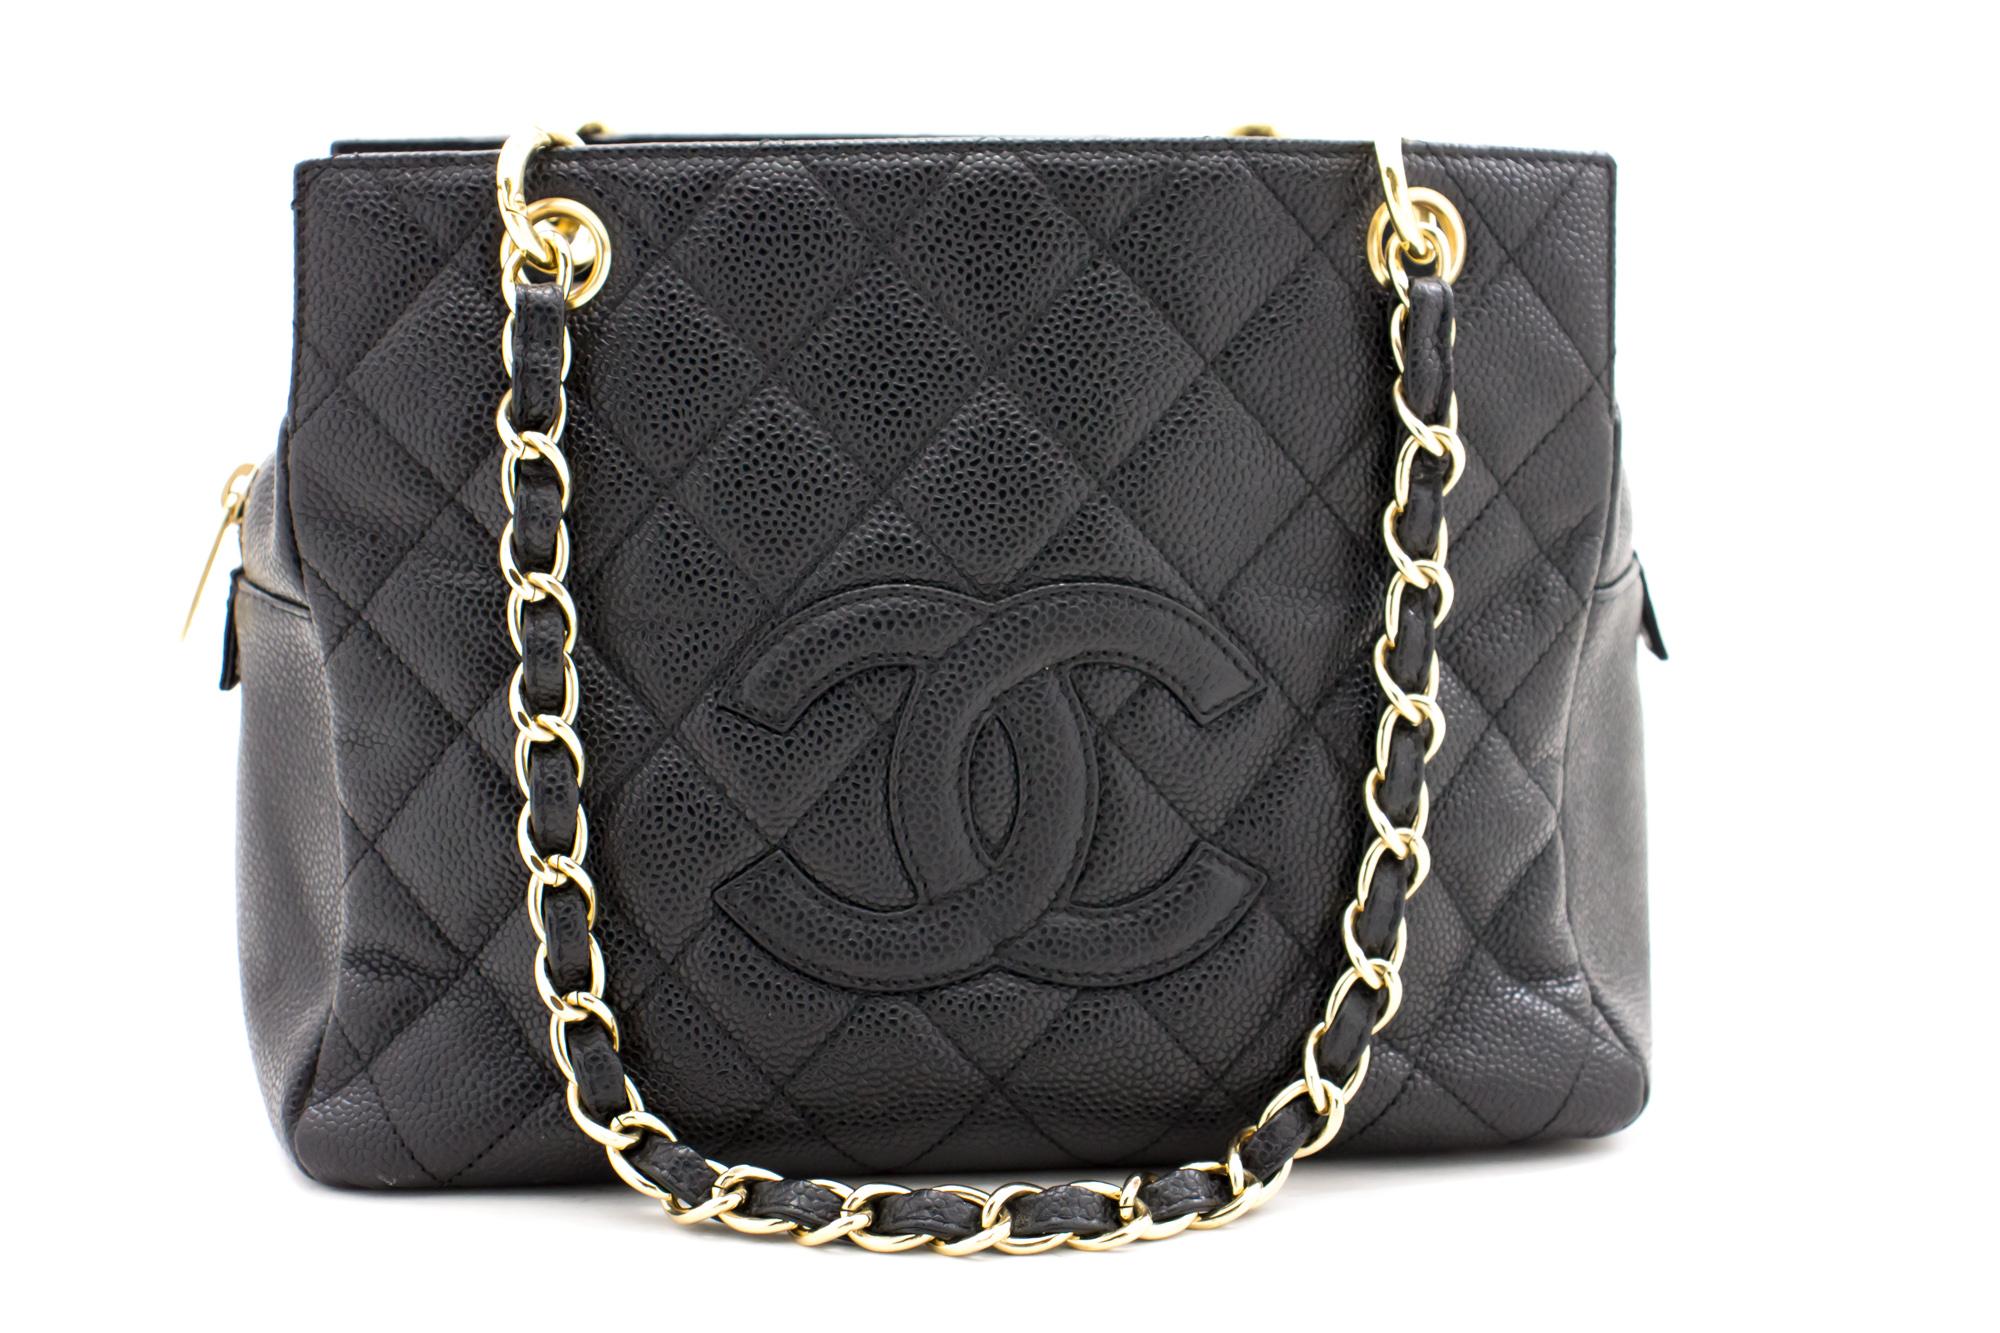 An authentic CHANEL Caviar Chain Shoulder Bag Shopping Tote Black Quilted. The color is Black. The outside material is Leather. The pattern is Solid. This item is Contemporary. The year of manufacture would be 2 0 0 2 .
Conditions & Ratings
Outside